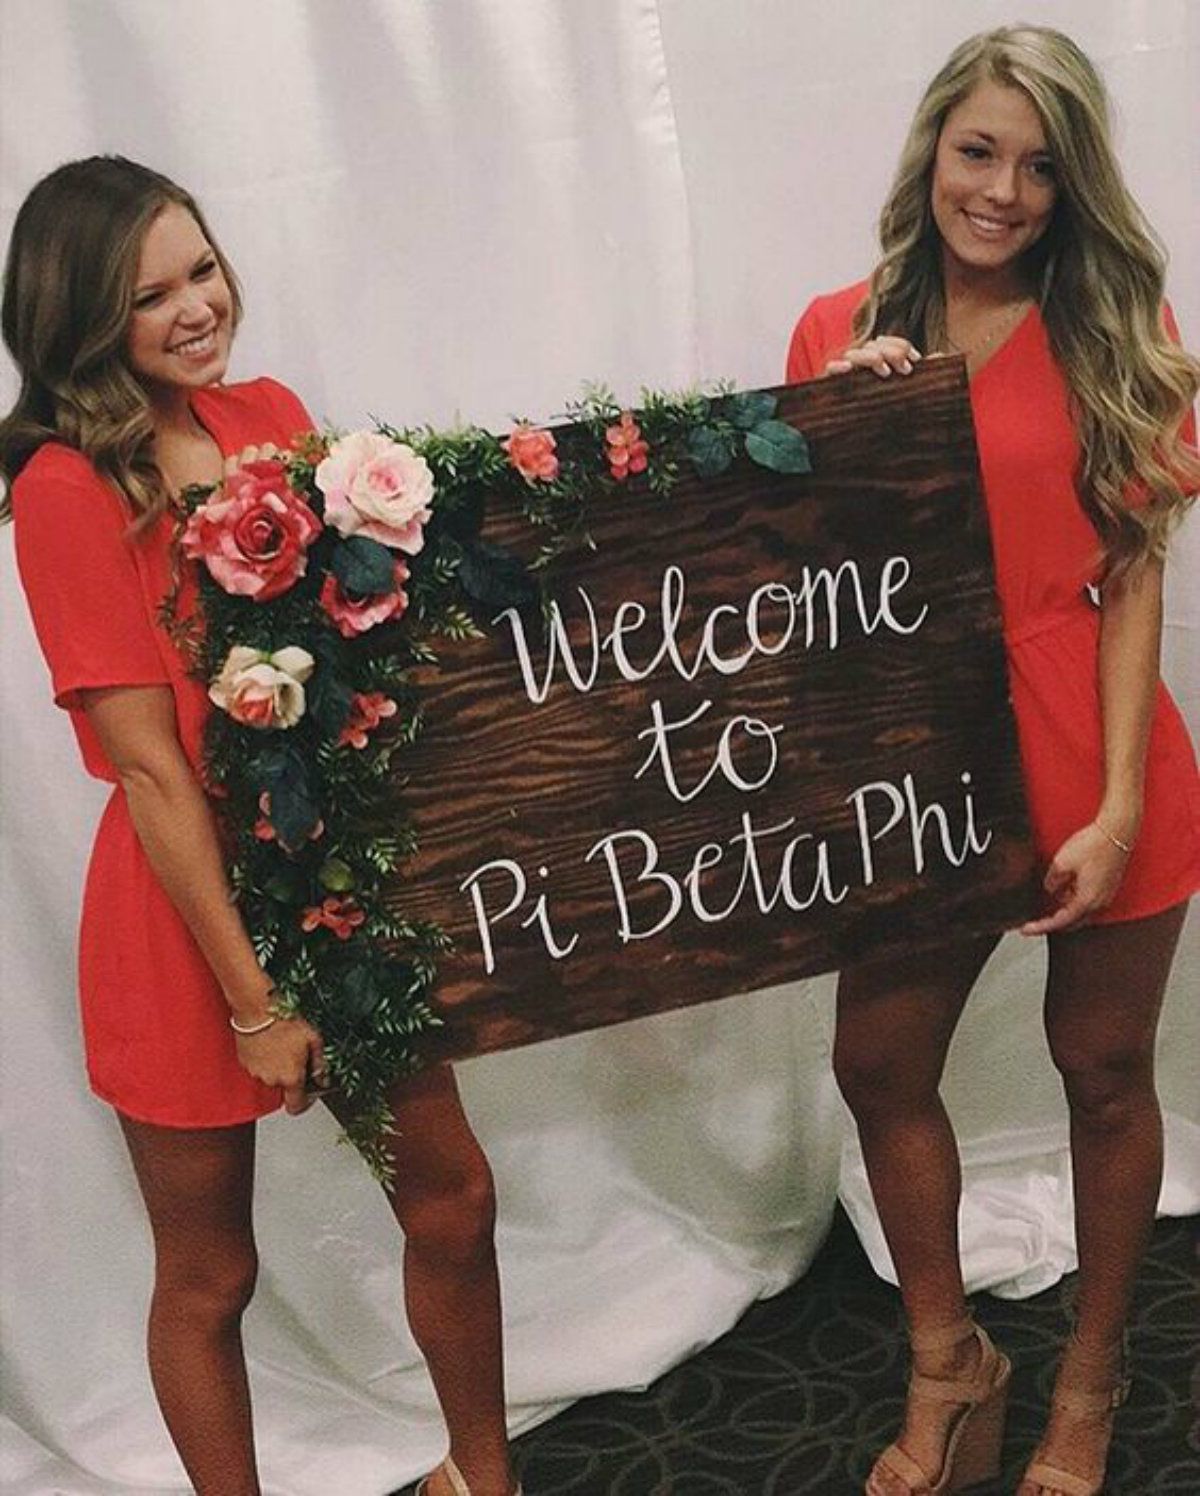 To The Girl Who "Can't" Go Greek